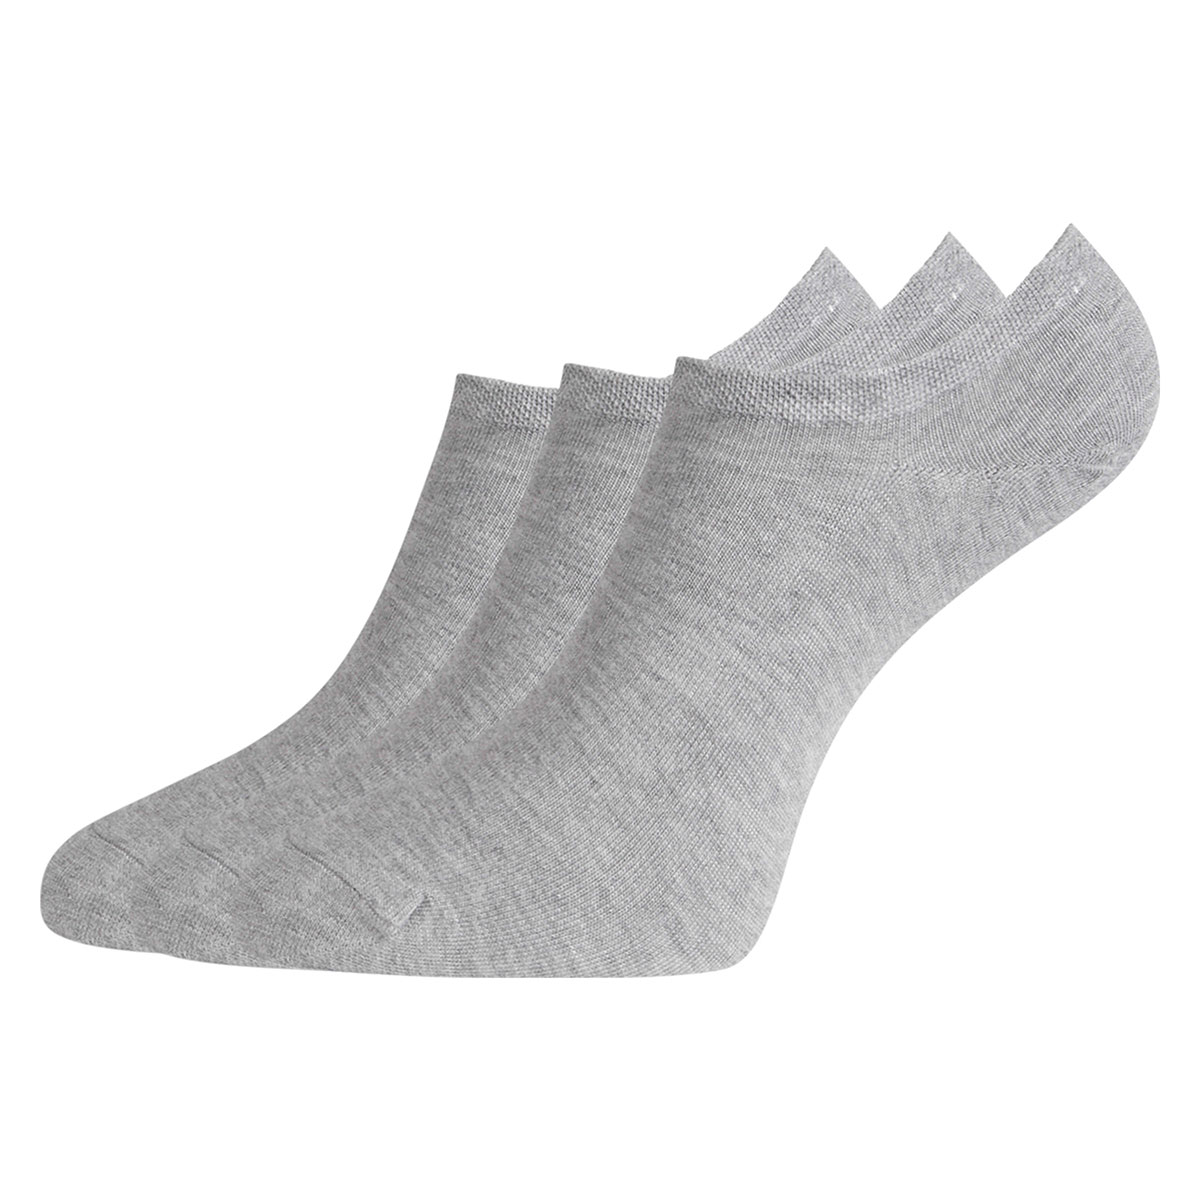 Bamboo Basics Footies Jamie (Pack of 3) - Grey Melange <table class="eigenschappen">
<tbody>
<tr>
<td width="60"><img class="size-full alignleft" src="https://bamboobasics.com/wp-content/uploads/2021/05/Zijdezacht-GROEN.png" alt="Bamboe kleding: Zijde zacht en fris" width="50" height="50" /></td>
<td><strong>Silky smooth</strong><br />
The fabric is supple and feels silky smooth. Even after several washes! </td>
</tr>
<tr>
<td width="60"><img class="size-full alignleft" src="https://bamboobasics.com/wp-content/uploads/2021/05/Thermo-GROEN.png" alt="Bamboe kleding: Zijde zacht en fris" width="50" height="50" /></td>
<td><strong>Thermo comfort</strong><br />
Bamboo textiles are warm, but also breathable. </td>
</tr>
<tr>
<td width="60"><img class="size-full alignleft" src="https://bamboobasics.com/wp-content/uploads/2021/05/Fresh-GROEN.png" alt="Bamboe kleding: Zijde zacht en fris" width="50" height="50" /></td>
<td><strong>Fresh</strong><br />
The bamboo fibers ensure that moisture absorbs and evaporates faster. Bamboo absorbs up to 70% more moisture than cotton. </td>
</tr>
<tr>
<td width="60"><img class="size-full alignleft" src="https://bamboobasics.com/wp-content/uploads/2021/05/UV-protection-GROEN.png" alt="Bamboe kleding: Zijde zacht en fris" width="50" height="50" /></td>
<td><strong>UV protection</strong><br />
Bamboo is naturally UV protective and filters 98% of harmful UV rays. </td>
</tr>
<tr>
<td width="60"><img class="size-full alignleft" src="https://bamboobasics.com/wp-content/uploads/2021/05/Allergeen-GROEN.png" alt="Bamboe kleding: Zijde zacht en fris" width="50" height="50" /></td>
<td><strong>Hypoallergenic</strong><br />
Do you have sensitive skin or suffer from allergies? Then bamboo underwear is the ideal choice for you. </td>
</tr>
<tr>
<td width="60"><img class="size-full alignleft" src="https://bamboobasics.com/wp-content/uploads/2021/05/Fit-GROEN.png" alt="Bamboe kleding: Zijde zacht en fris" width="50" height="50" /></td>
<td><strong>Perfect fit</strong><br />
The combination of elastane and cotton with bamboo ensures an extra strong fabric and a perfect fit. </td>
</tr>
</tbody>
</table>